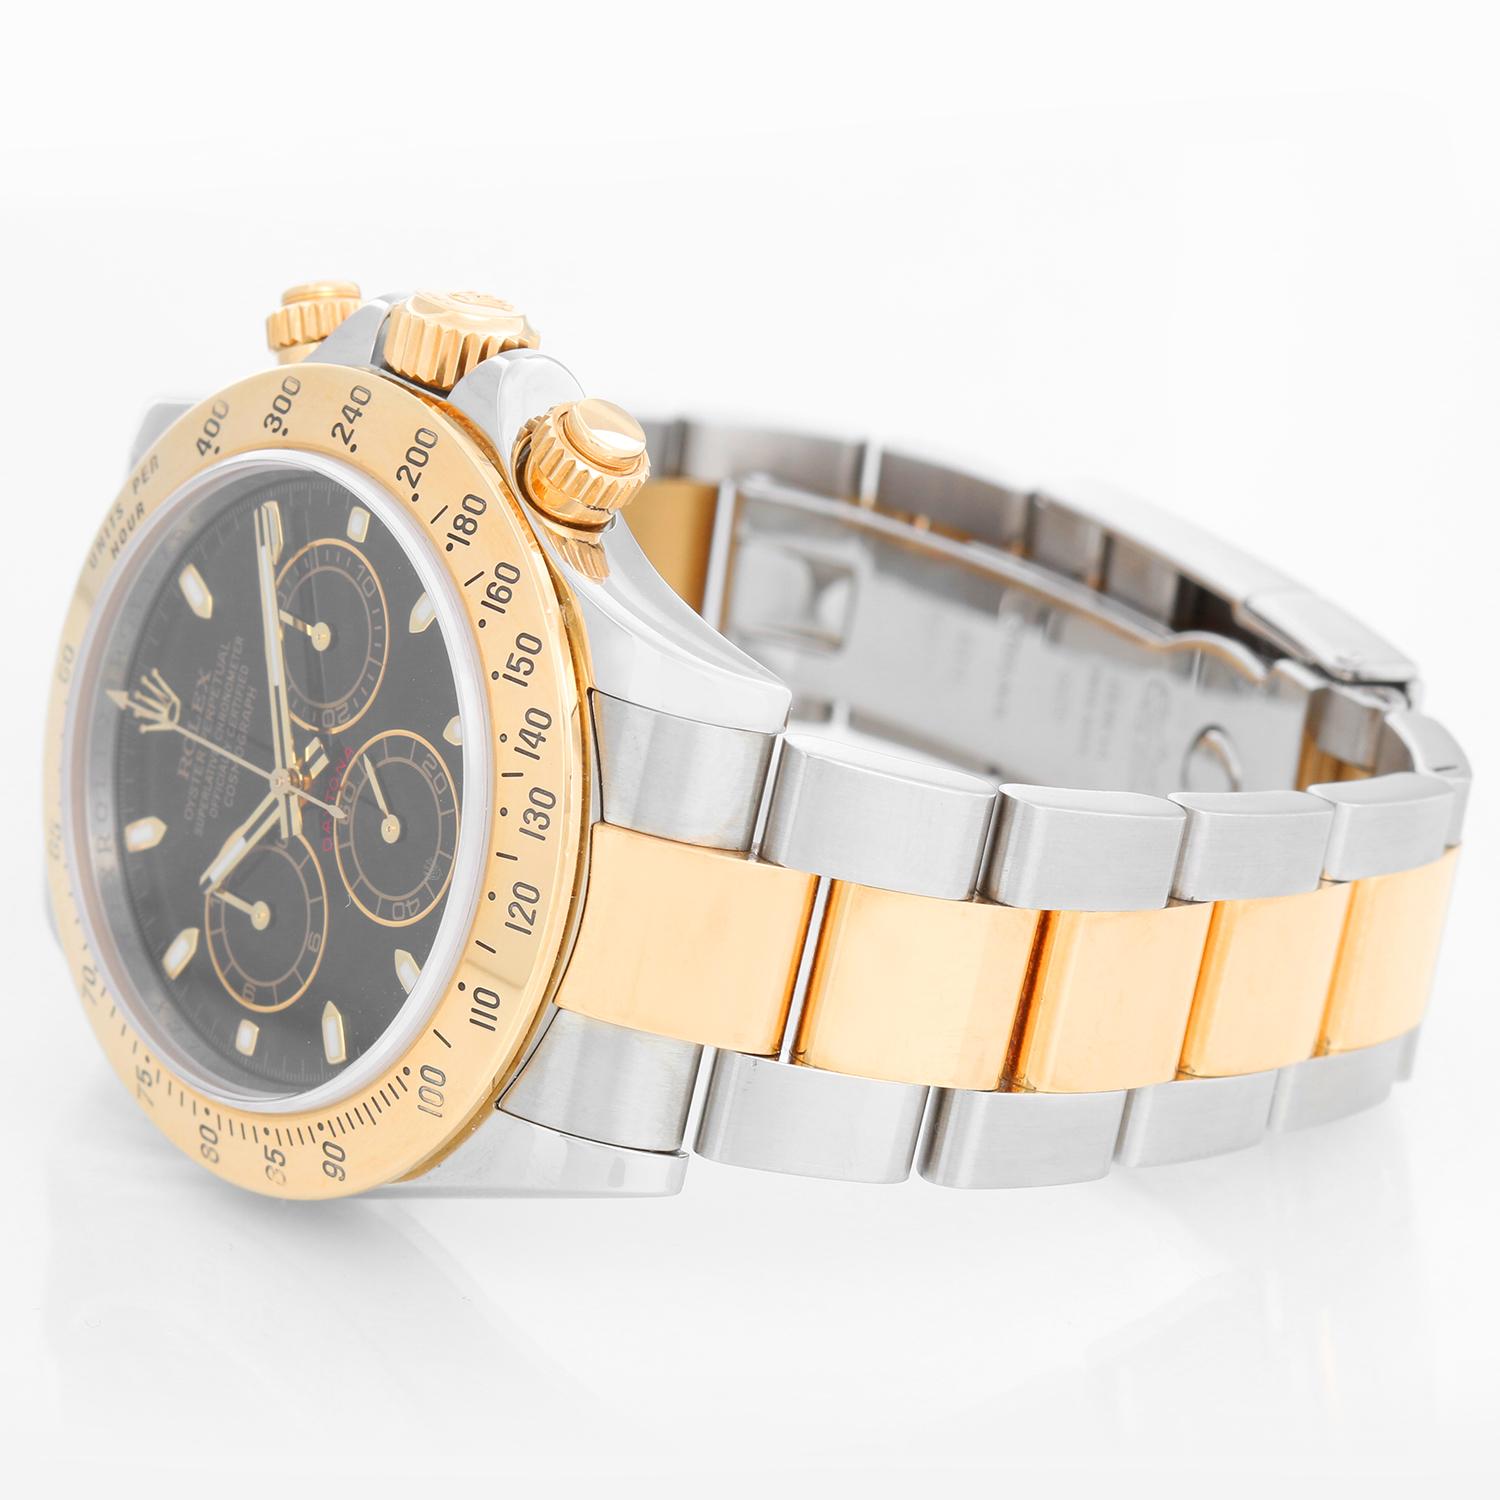 Rolex Cosmograph Daytona Men's Watch 116523 - Automatic winding, chronograph, 44 jewels, sapphire crystal. Stainless steel case with 18k yellow gold bezel. Black  dial with luminous-style markers. Stainless steel and 18k yellow gold Oyster bracelet